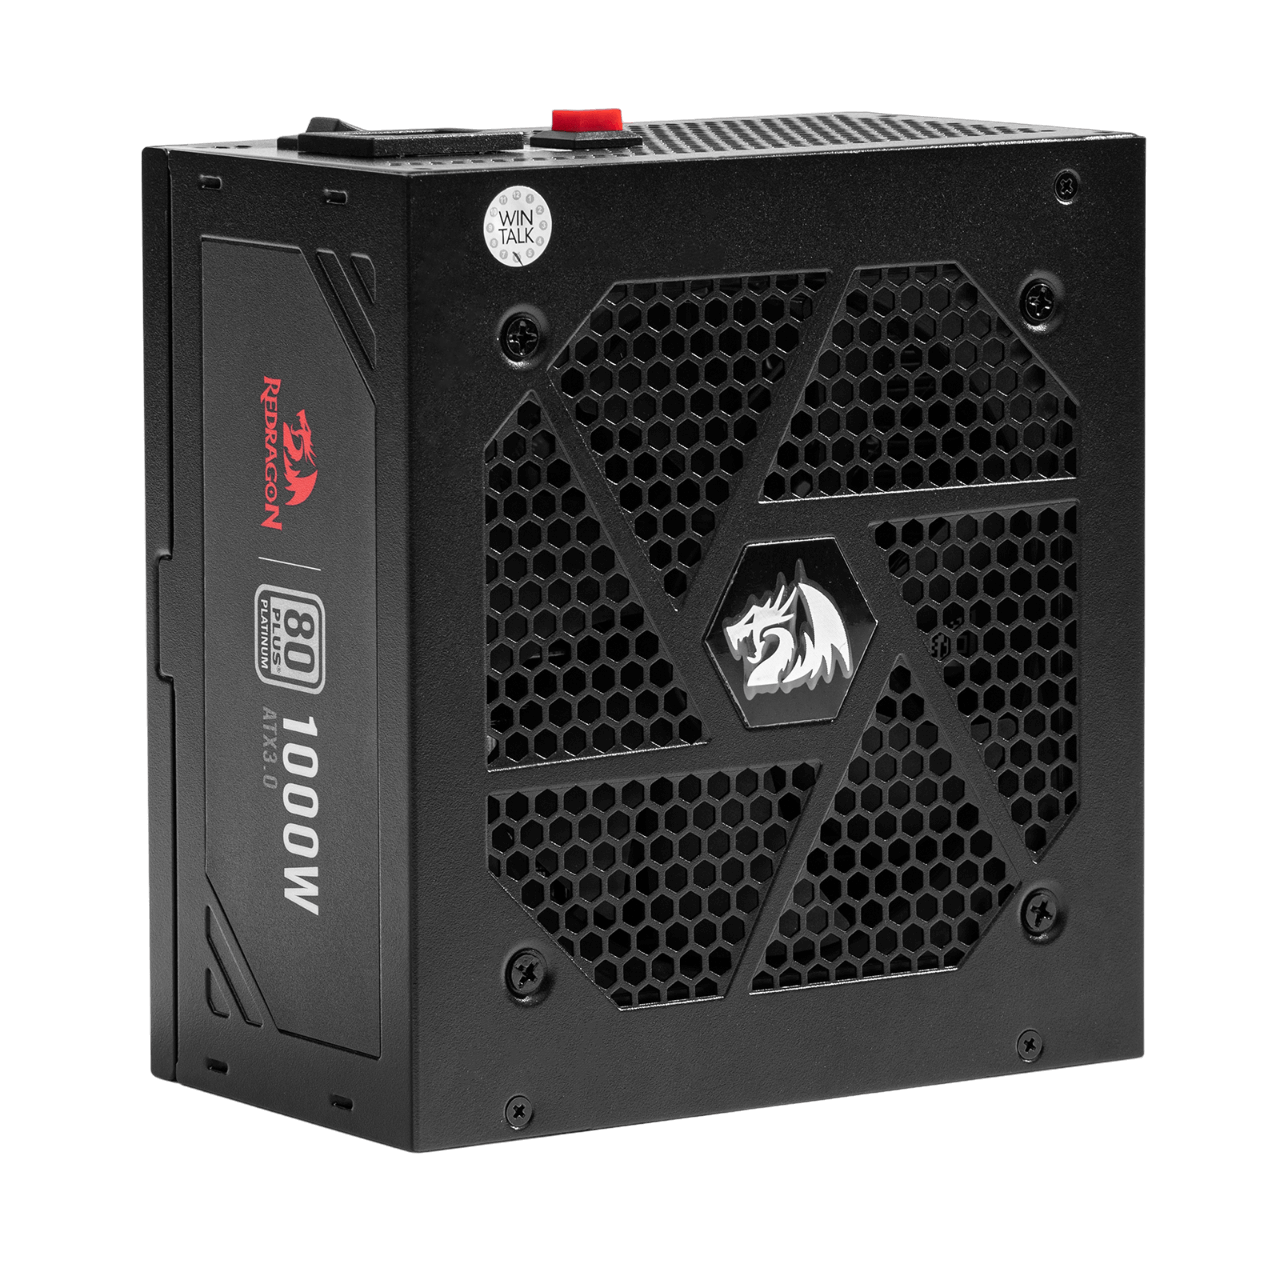 80+ Platinum 1000/1300 Watt ATX 3.0 Fully Modular Power Supply Includes a FREE 12VHPWR Cable